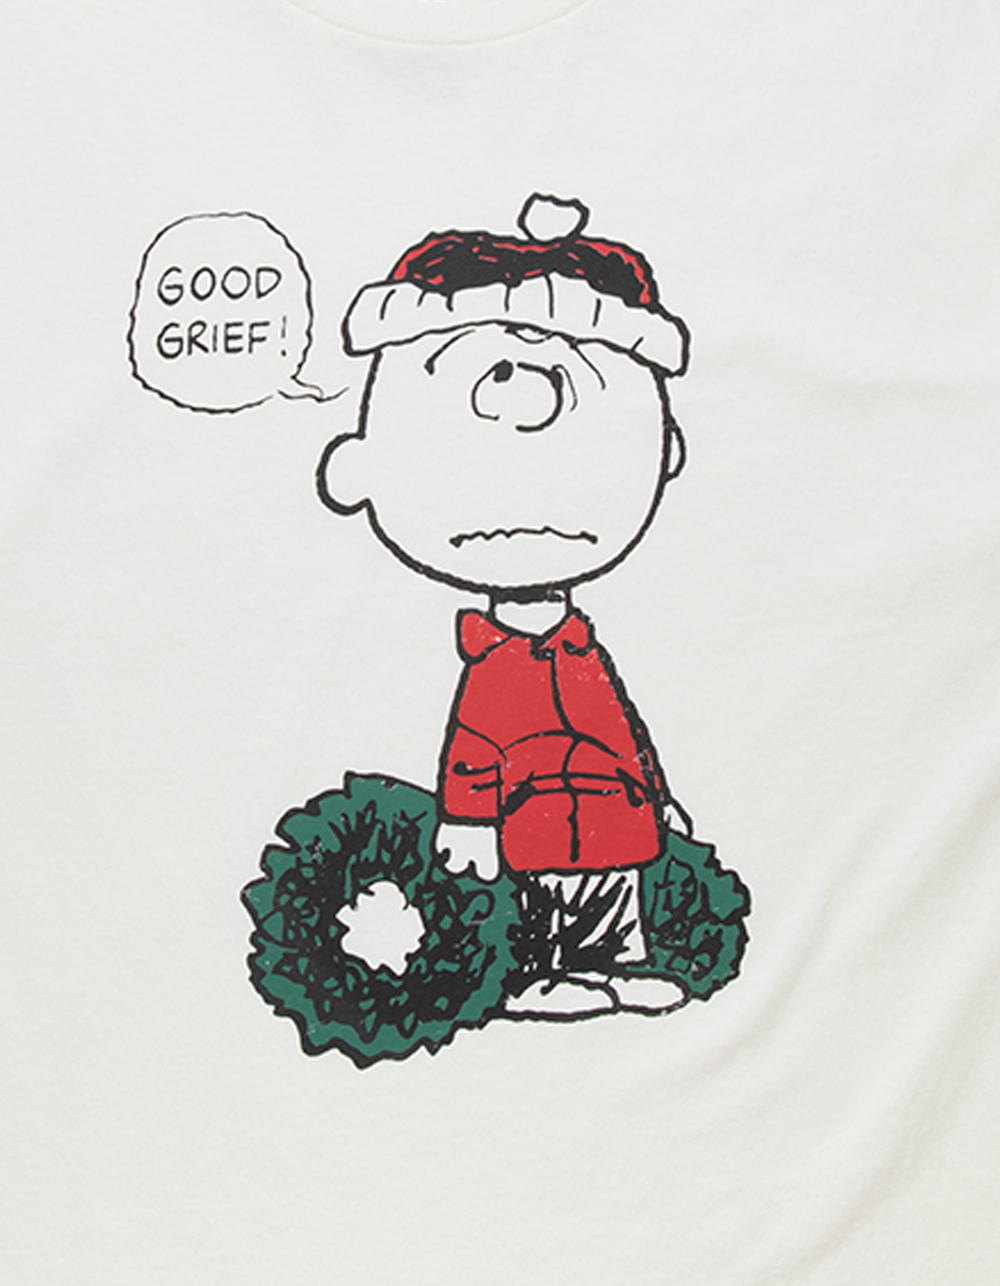 Rsq x Peanuts Holiday Snoopy's Candy Cane Delight Tee - Tan - X-Large